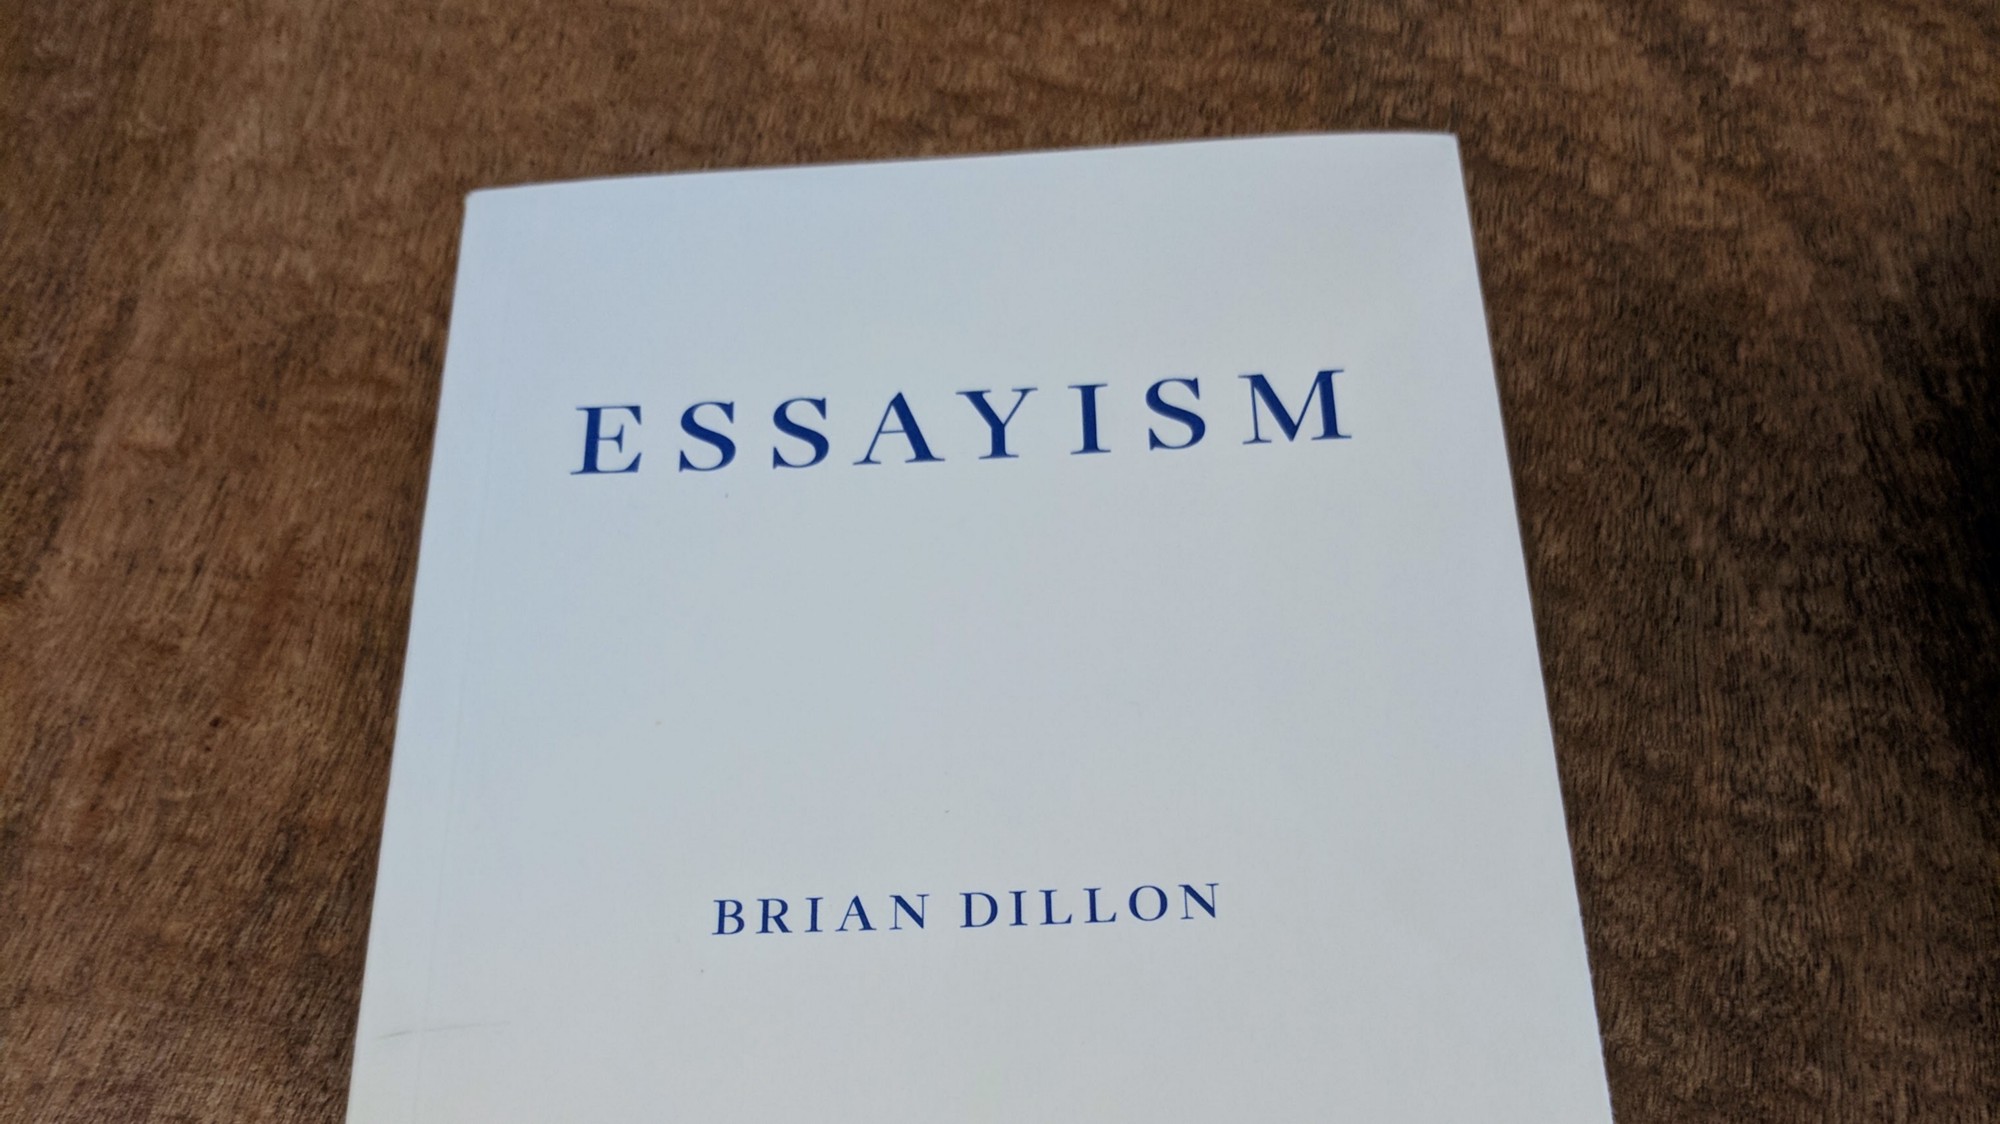 The cover of the book: Essayism by Brian Dillon